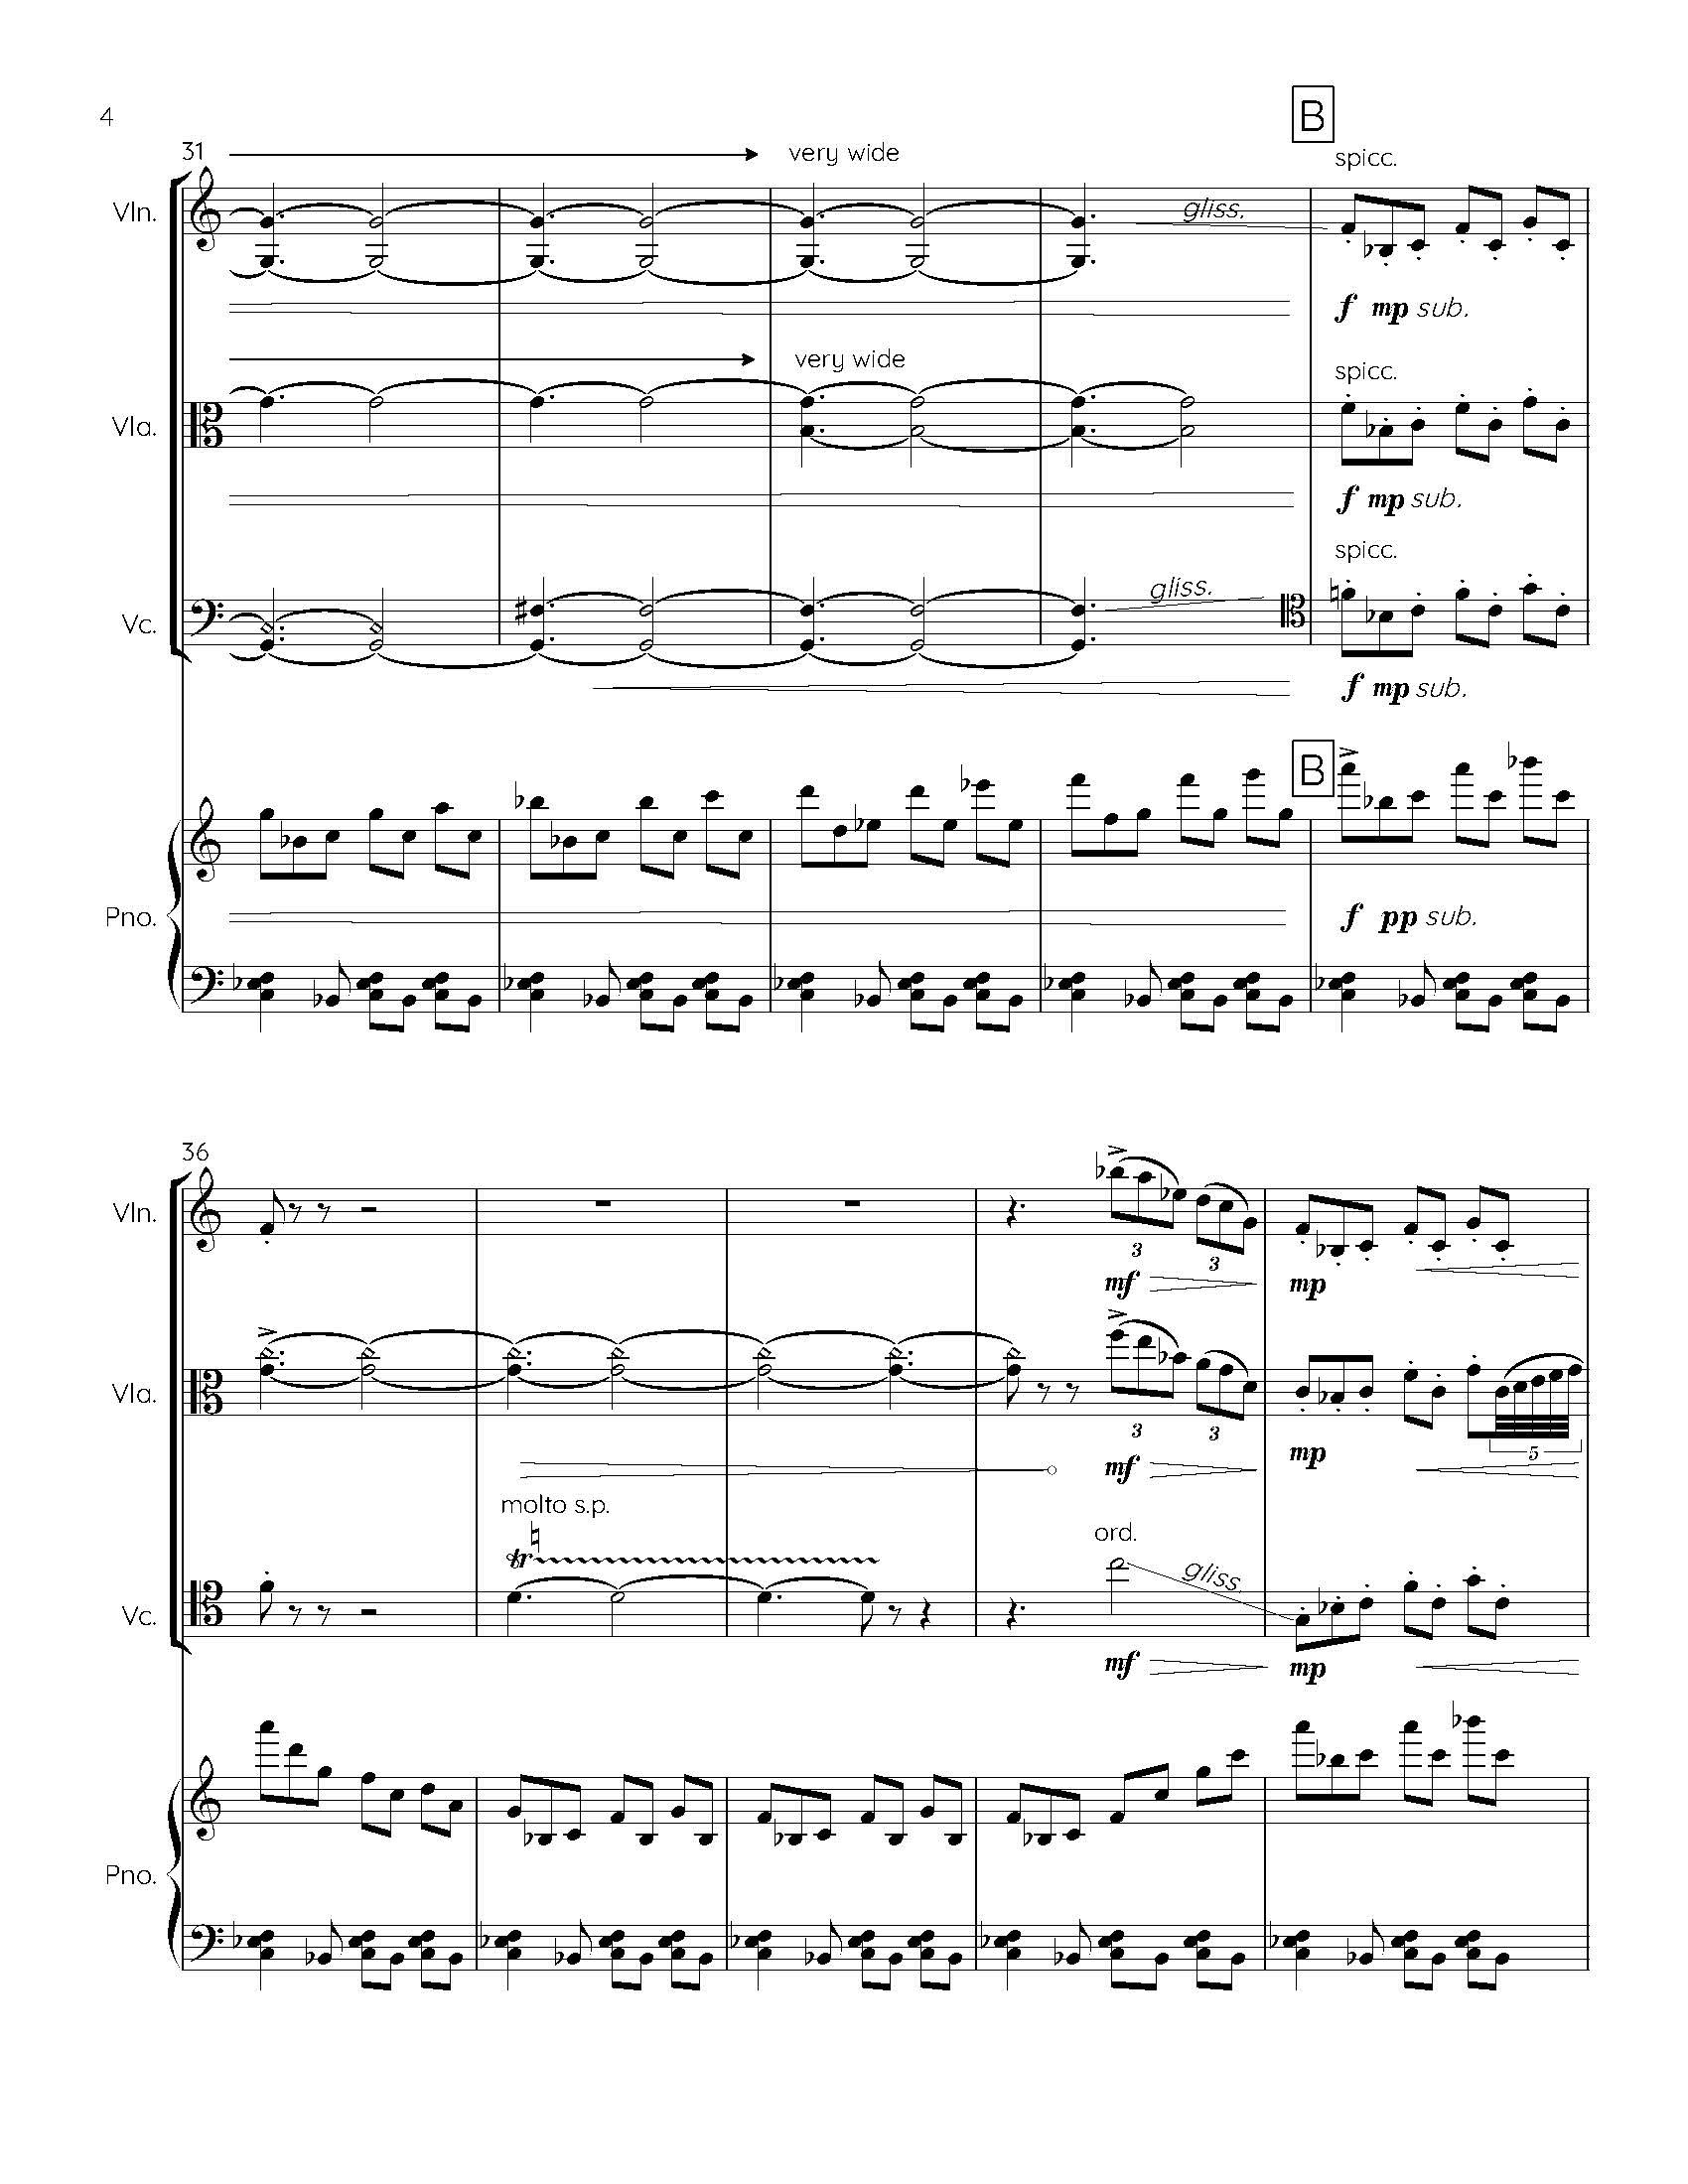 I S L A N D I - Complete Score_Page_10.jpg